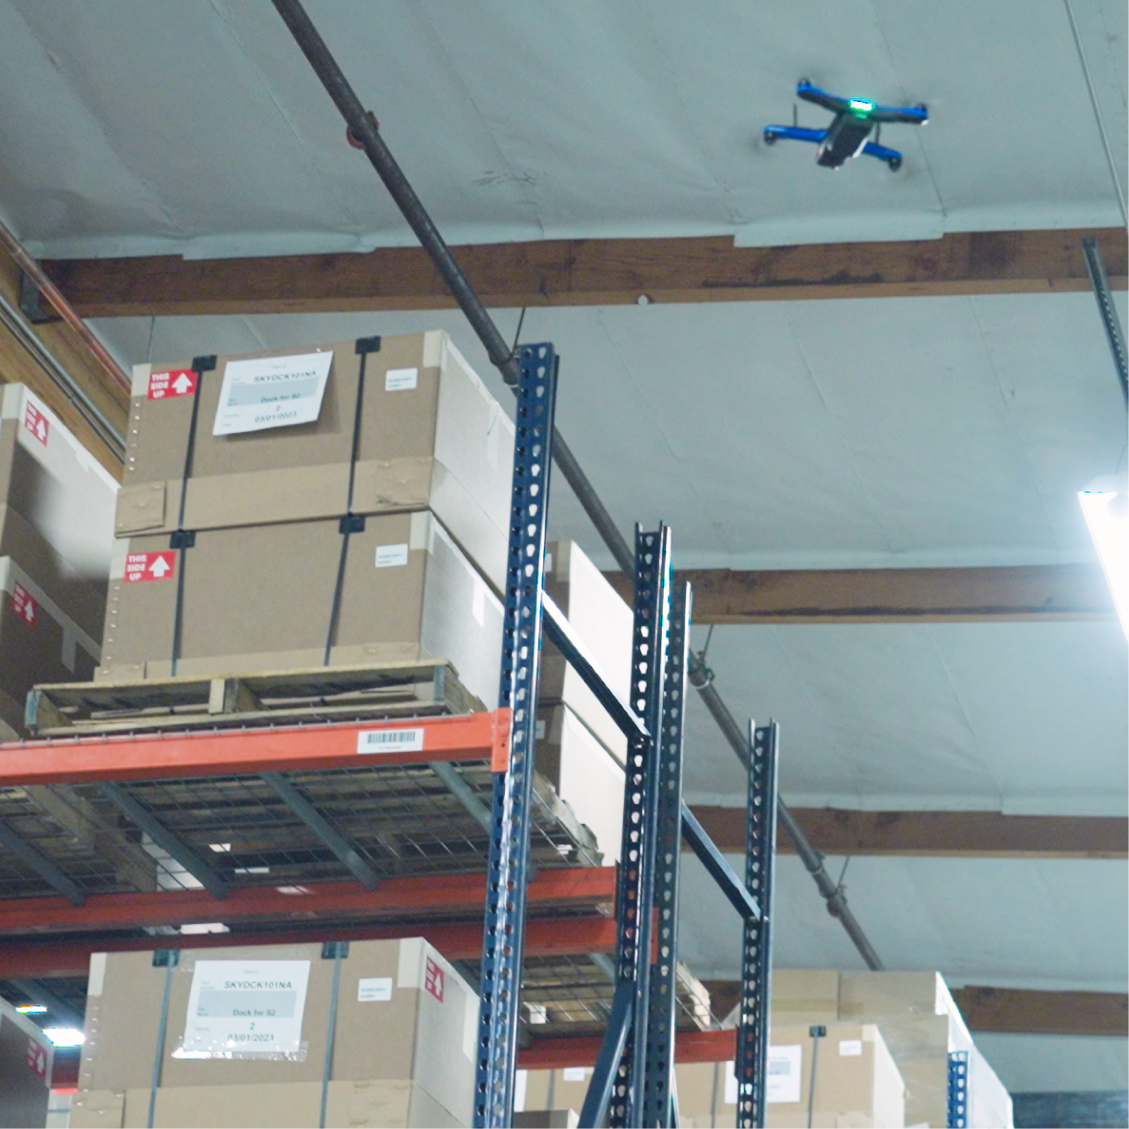 Skydio drone in flight scanning warehouse inventory above shelves